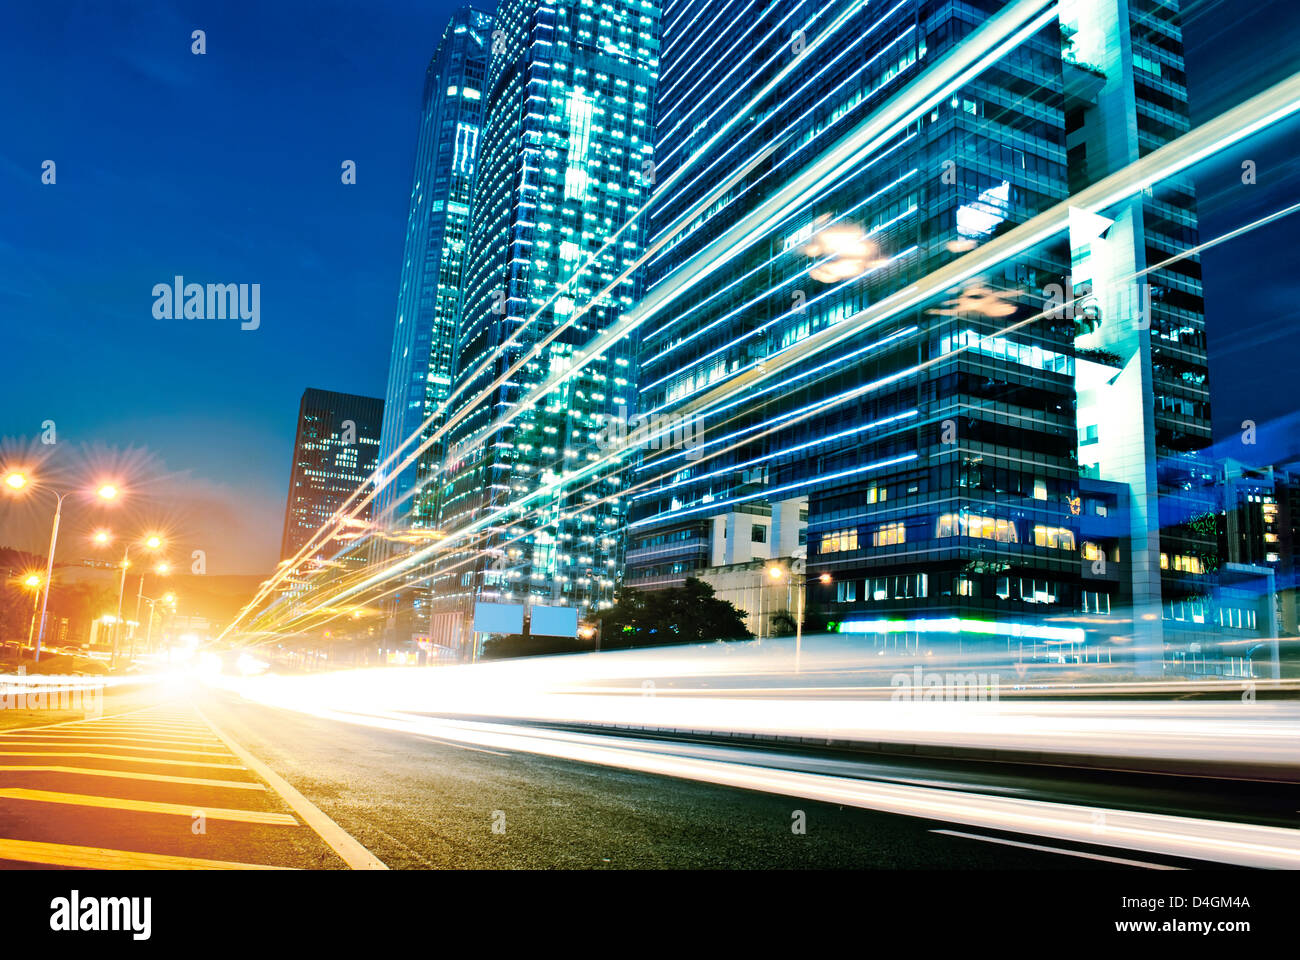 The busy city traffic in China Stock Photo